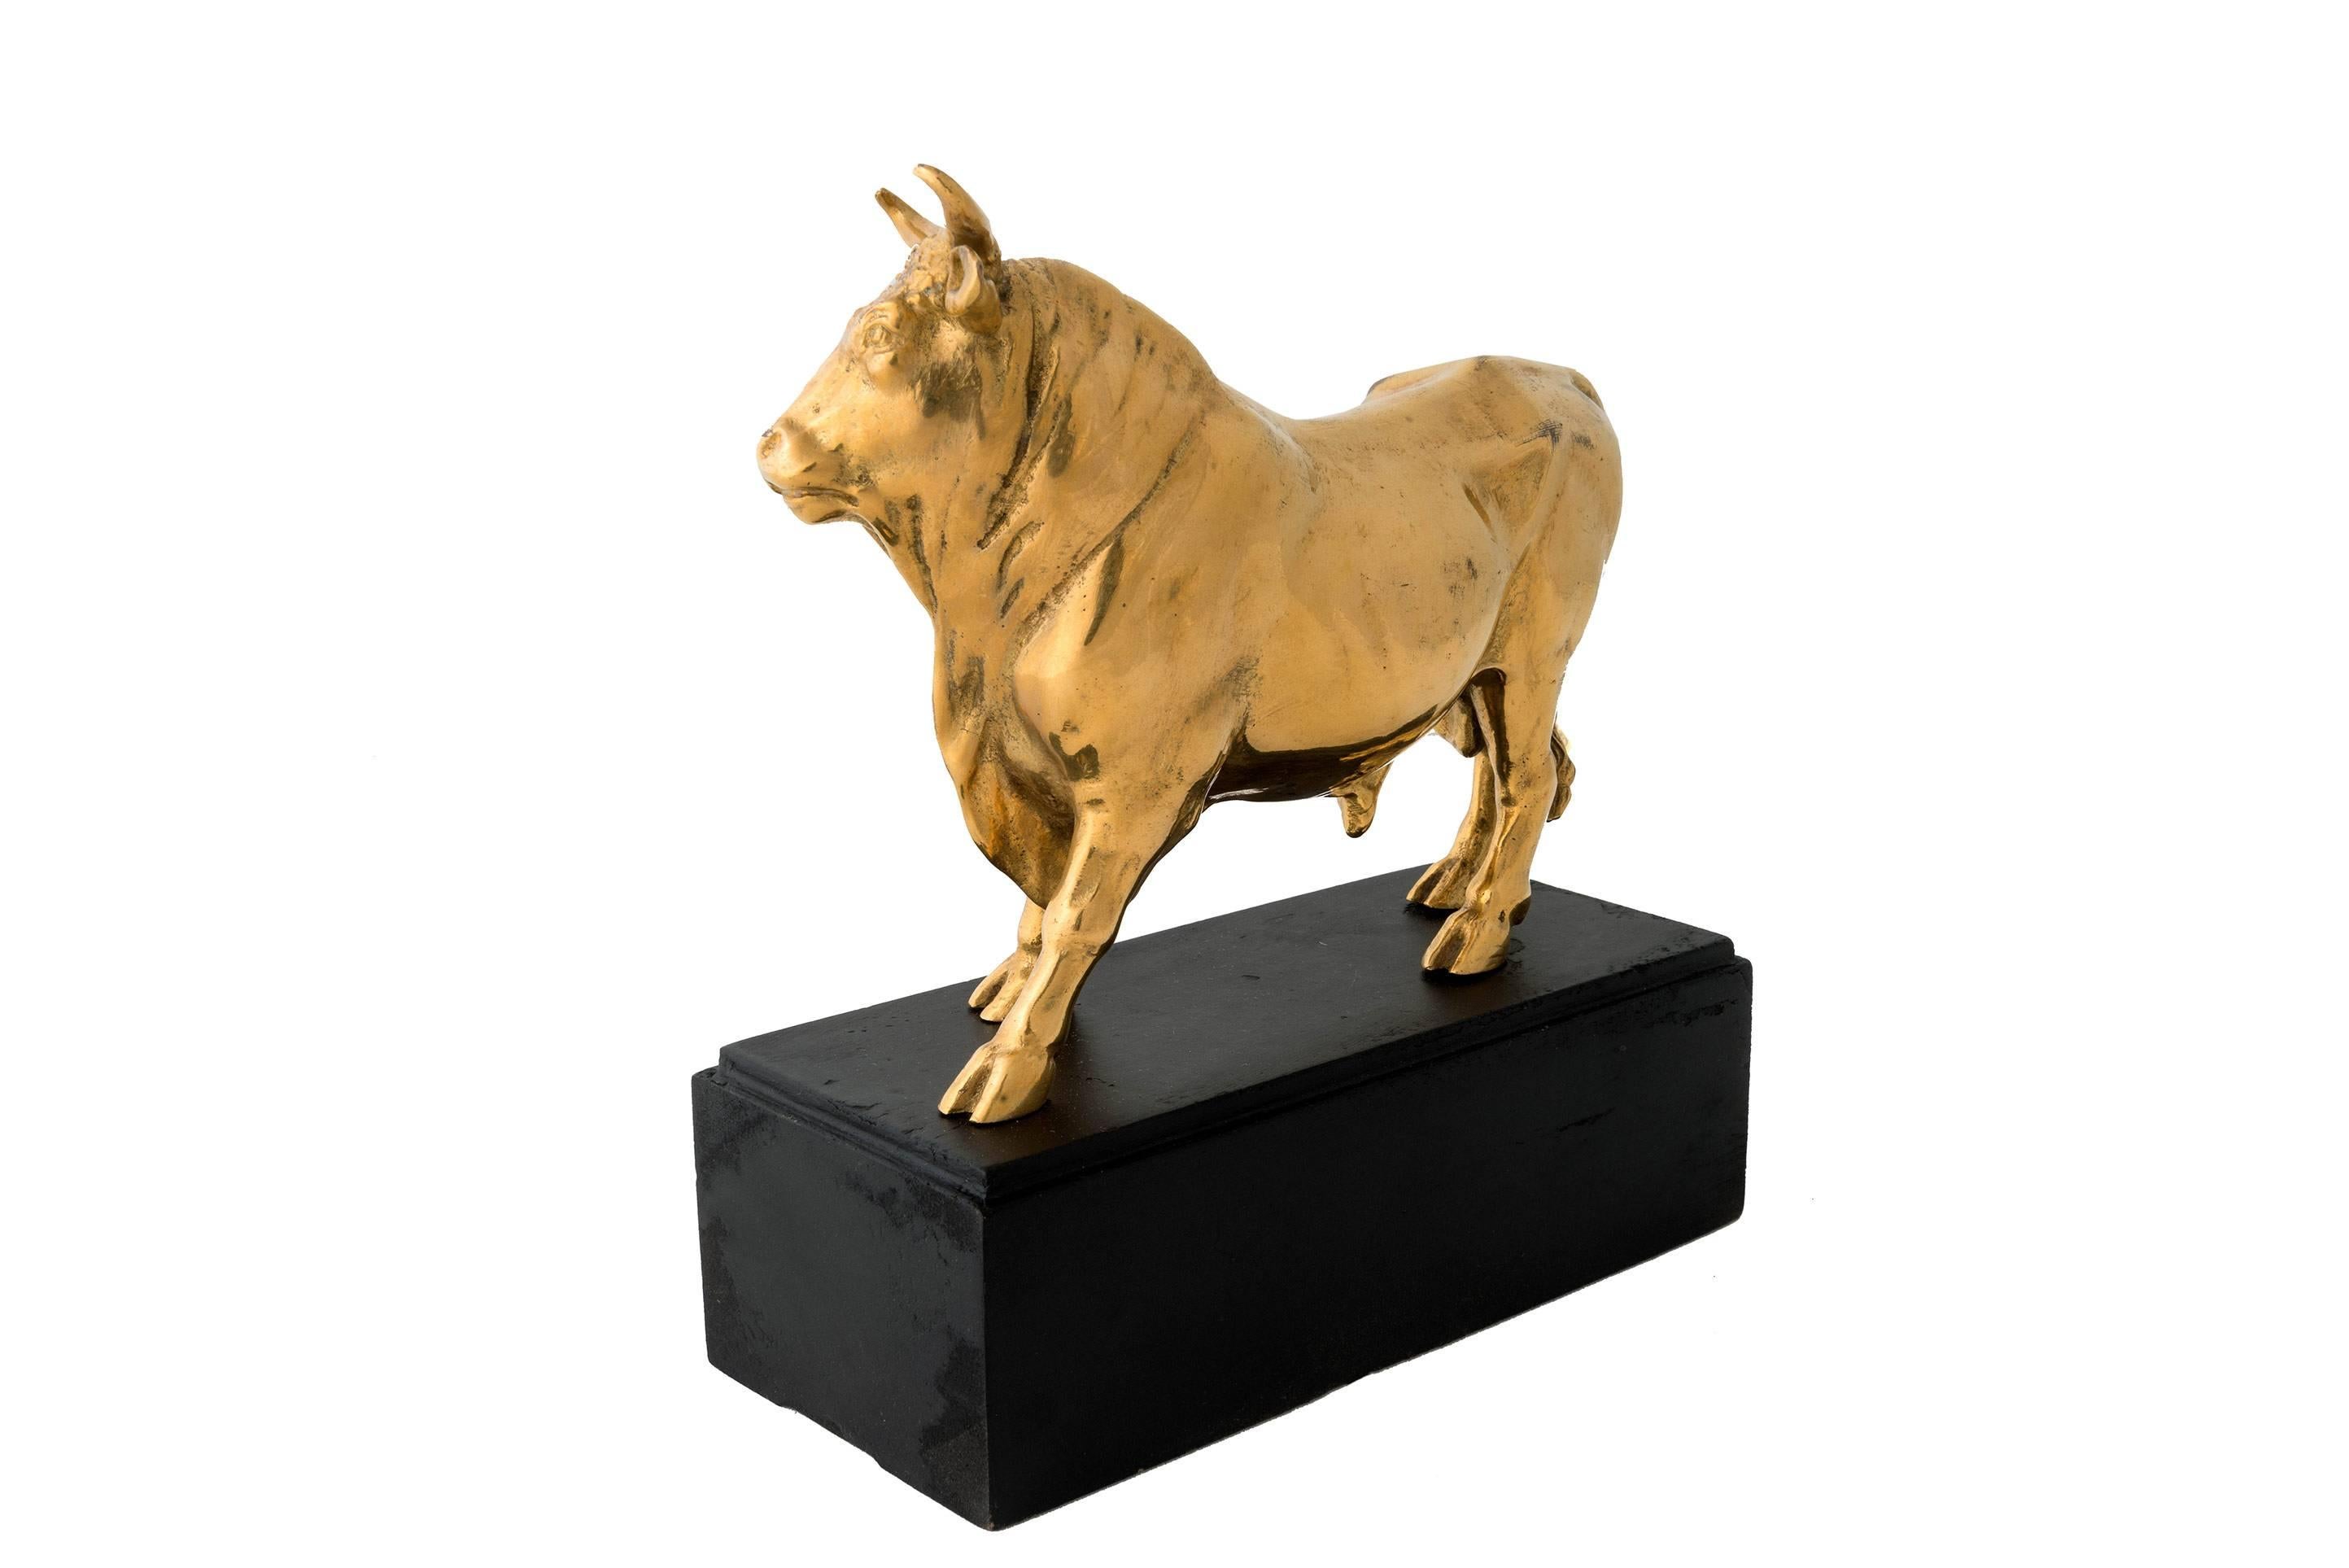 Fine gilt bronze sculpture of a bull, from late 17th century, Italy.
The sculpture itself measures 16.5cm by 6cm, and 12cm in height.
Provenance: Nicolas Landau Collection